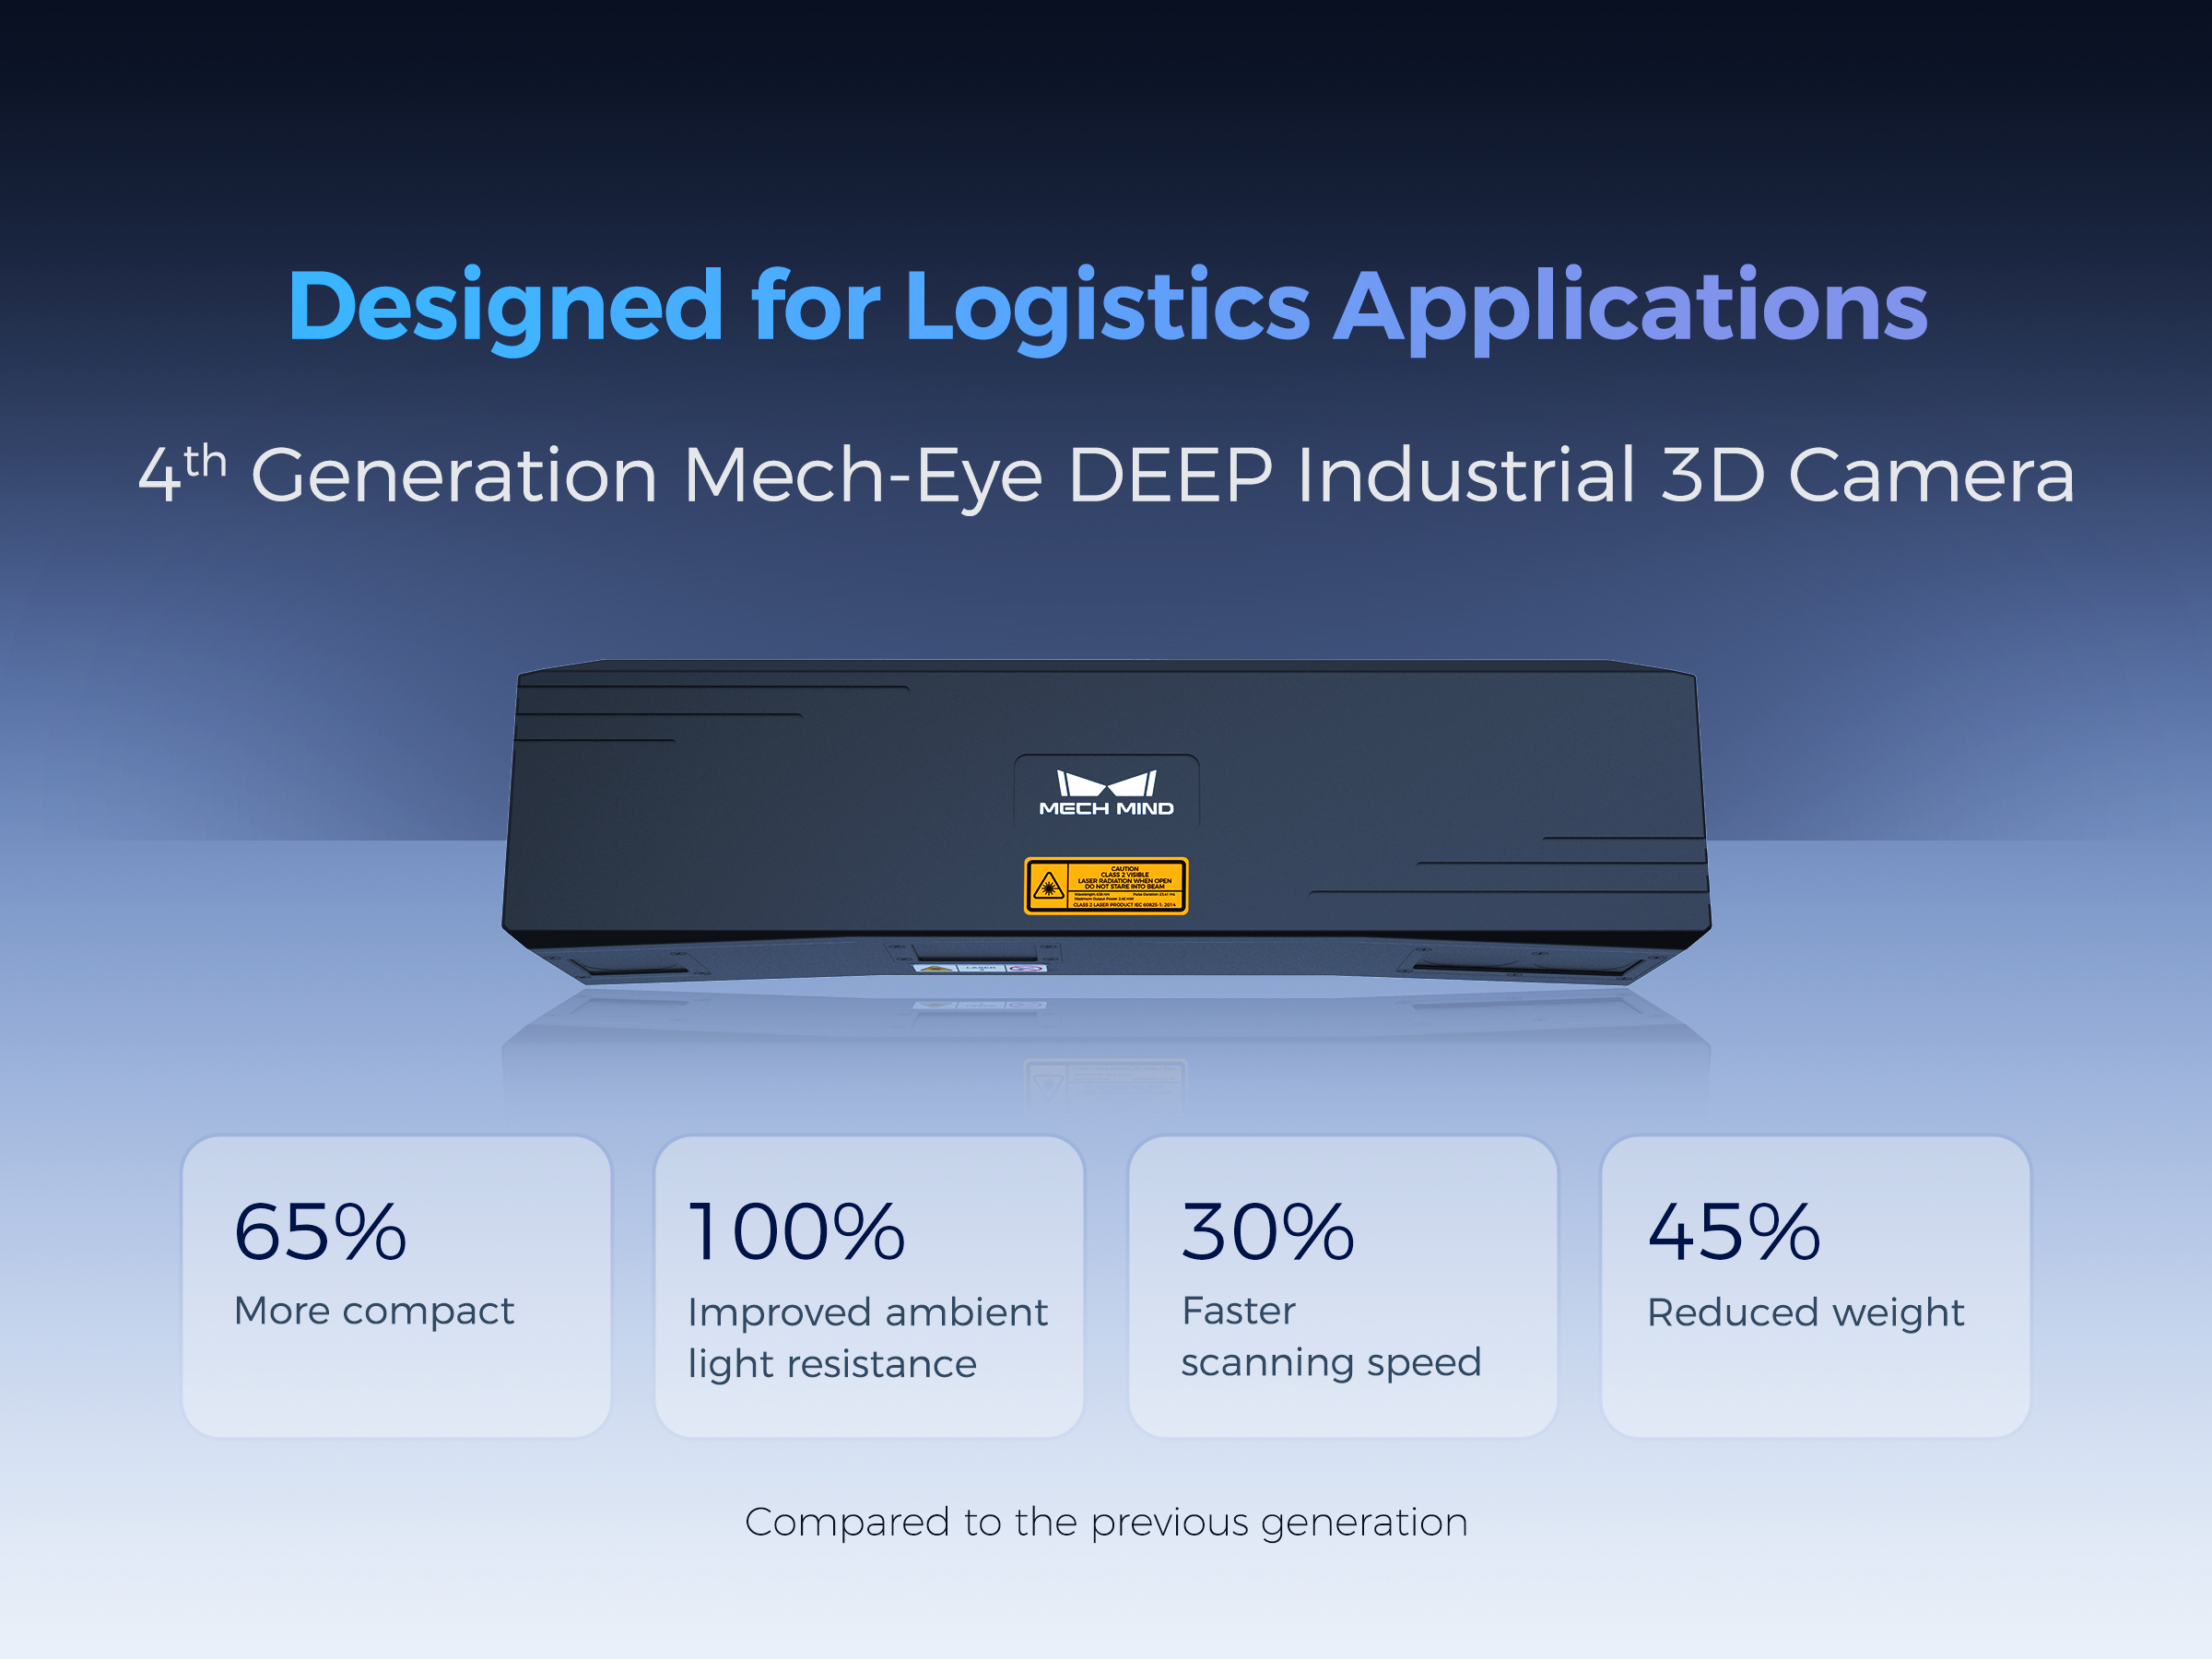 Introducing Brand New 4th Generation Mech-Eye DEEP for Palletizing and Depalletizing Applications in Logistics  